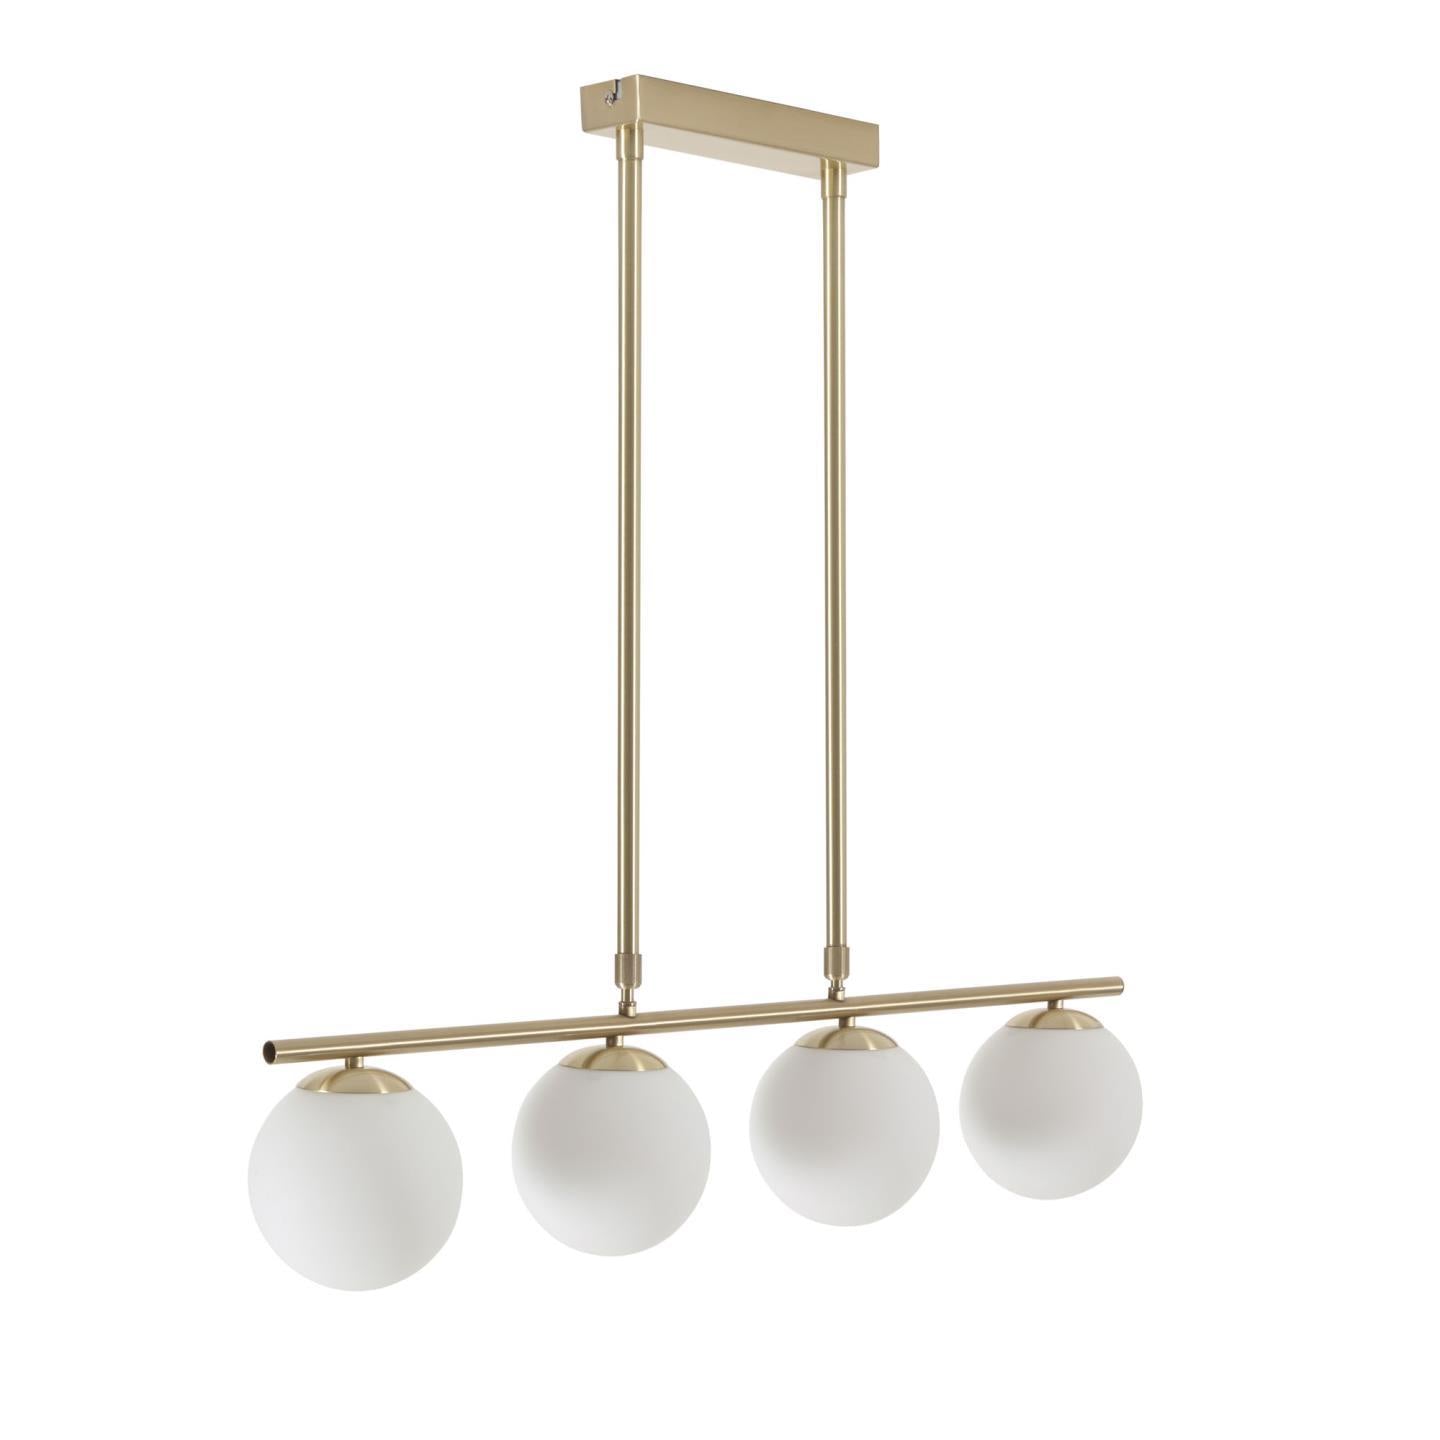 Mahala steel ceiling light with brass finish and four frosted glass spheres